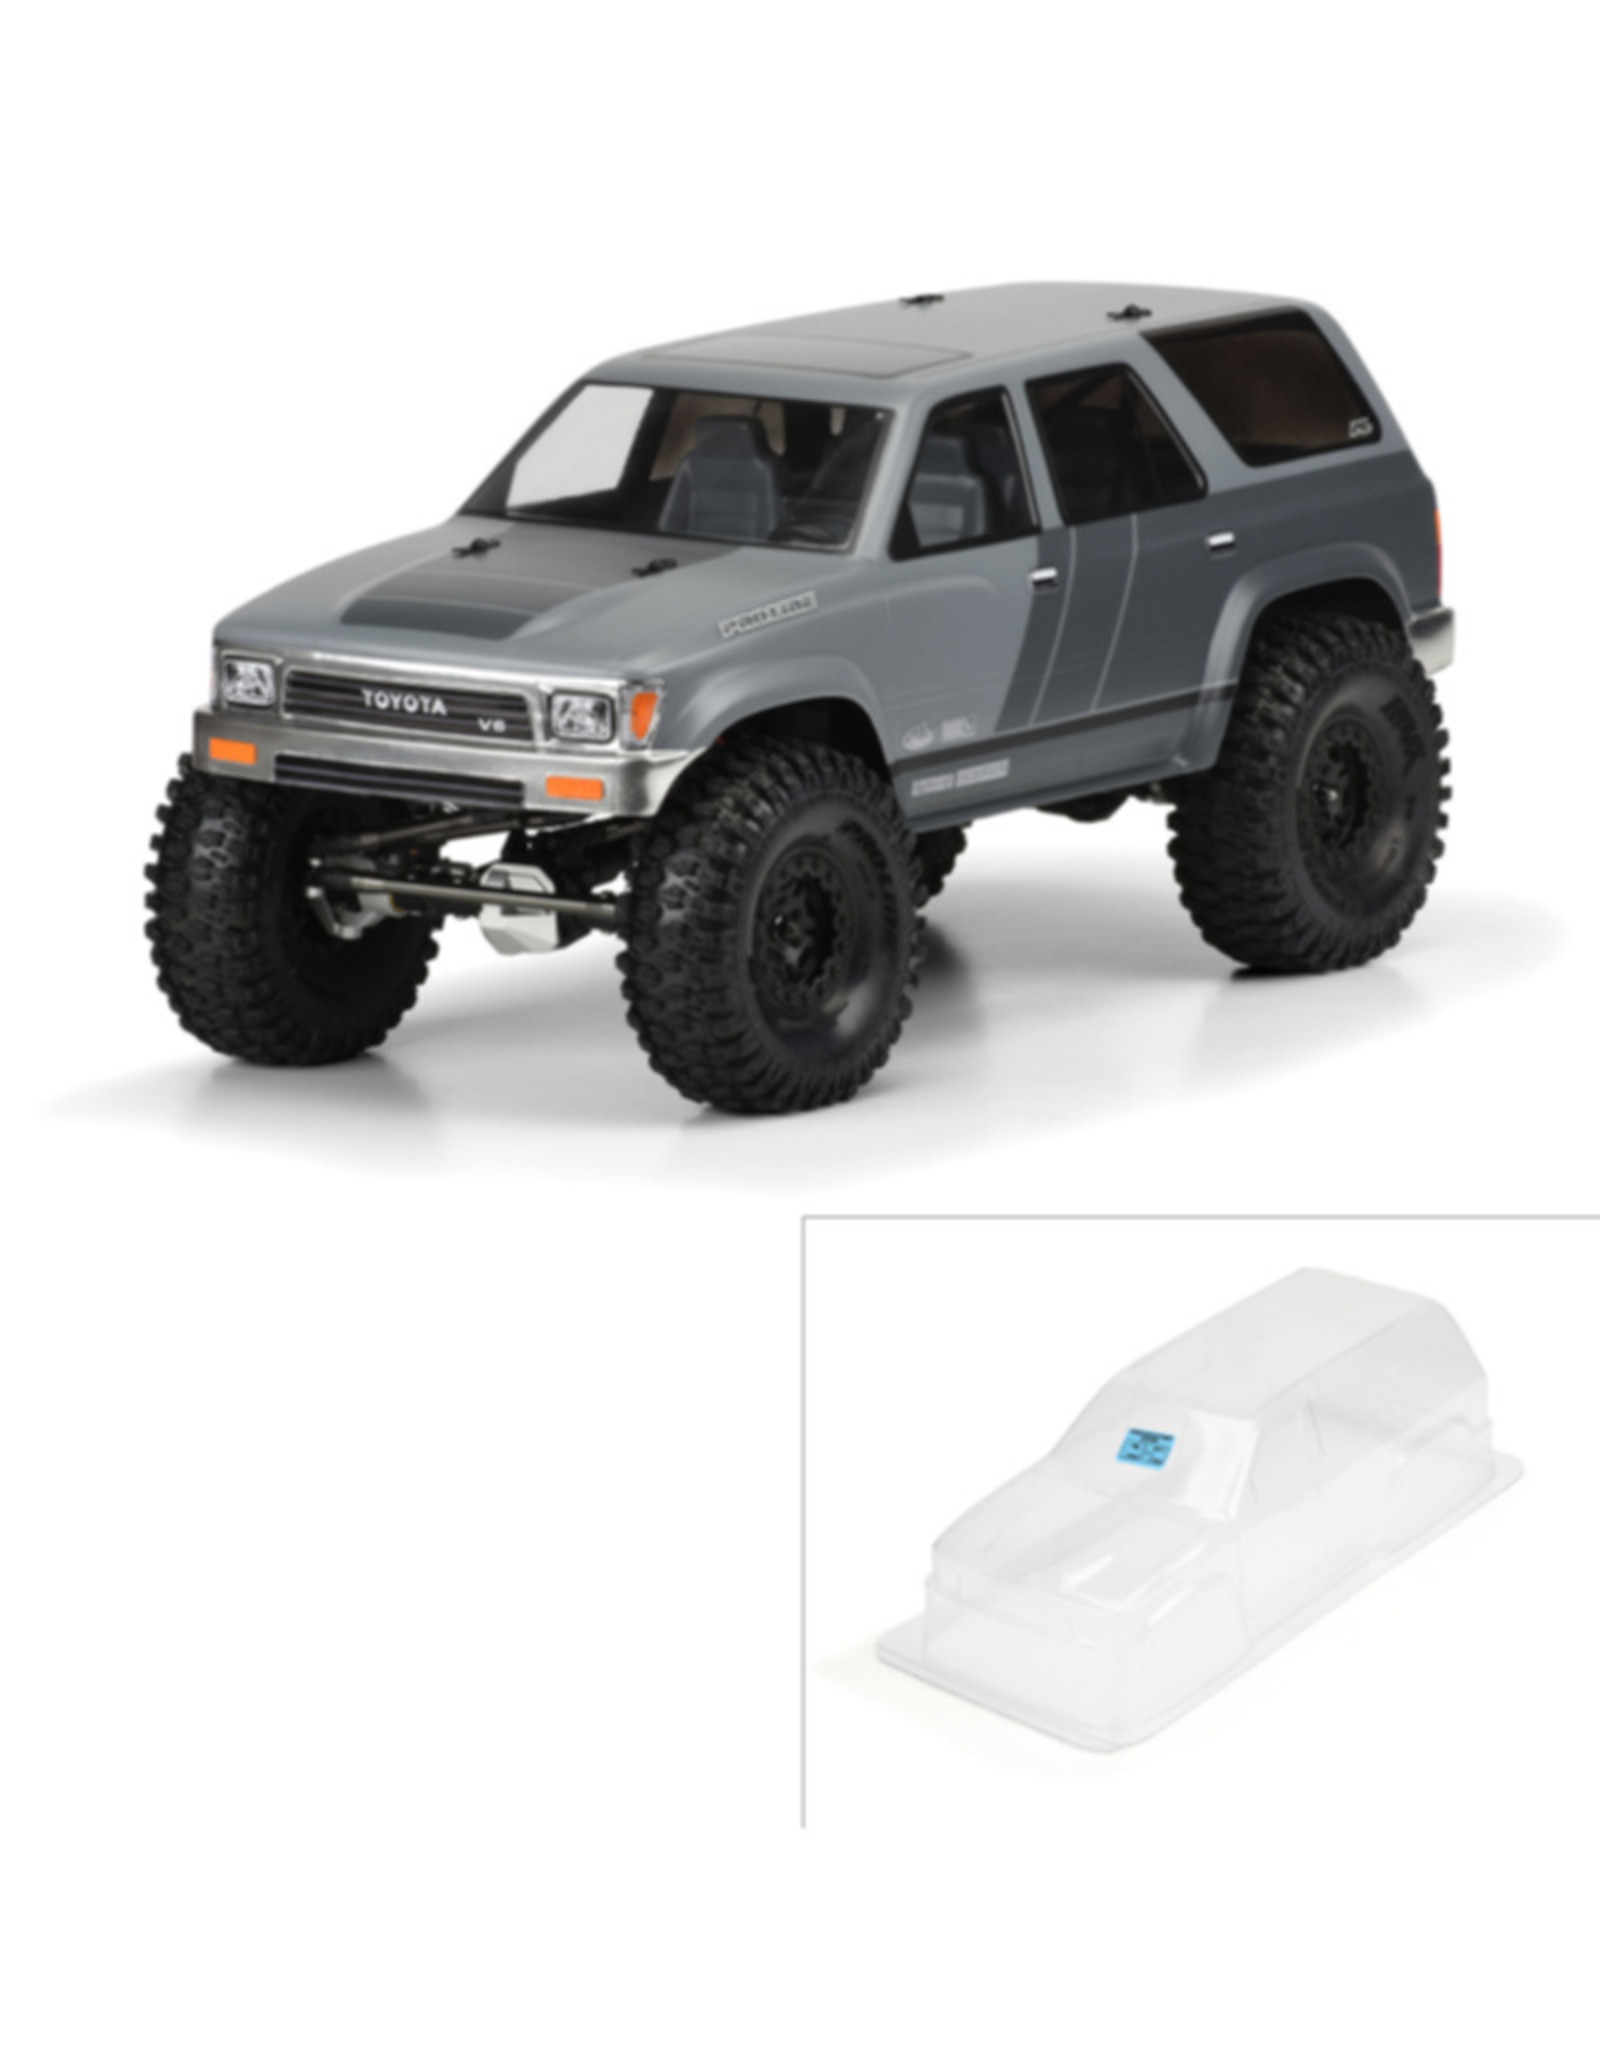 Pro-Line Racing PRO348100 1991 Toyota 4 Runner Clear Body for 12.3 Wheelbase Scale Crawlers